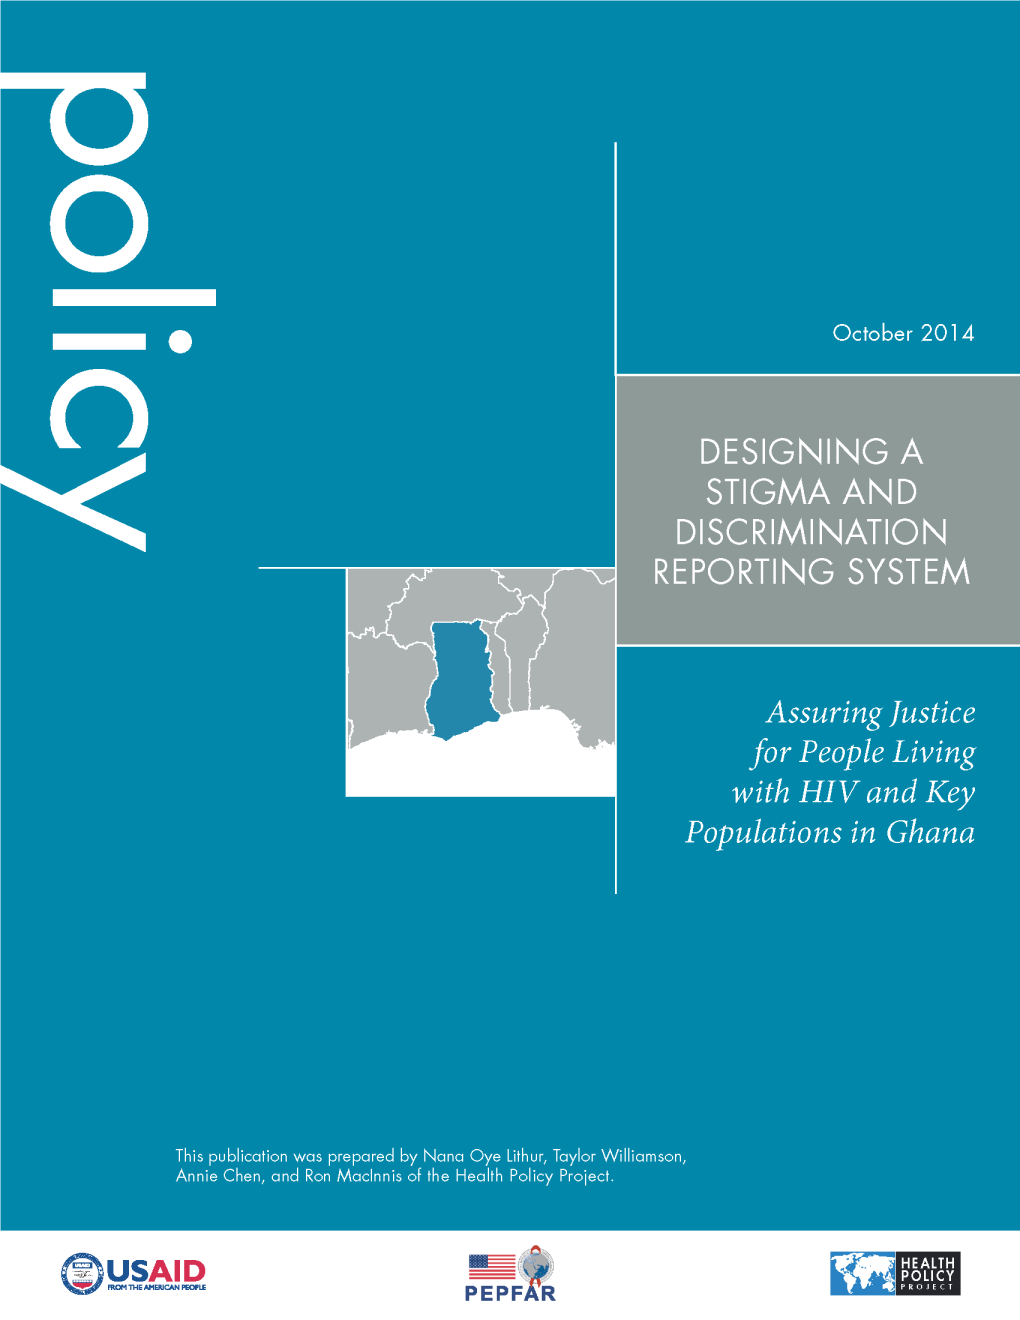 Designing a Stigma and Discrimination Reporting System: Assuring Justice for People Living with HIV and Key Populations in Ghana